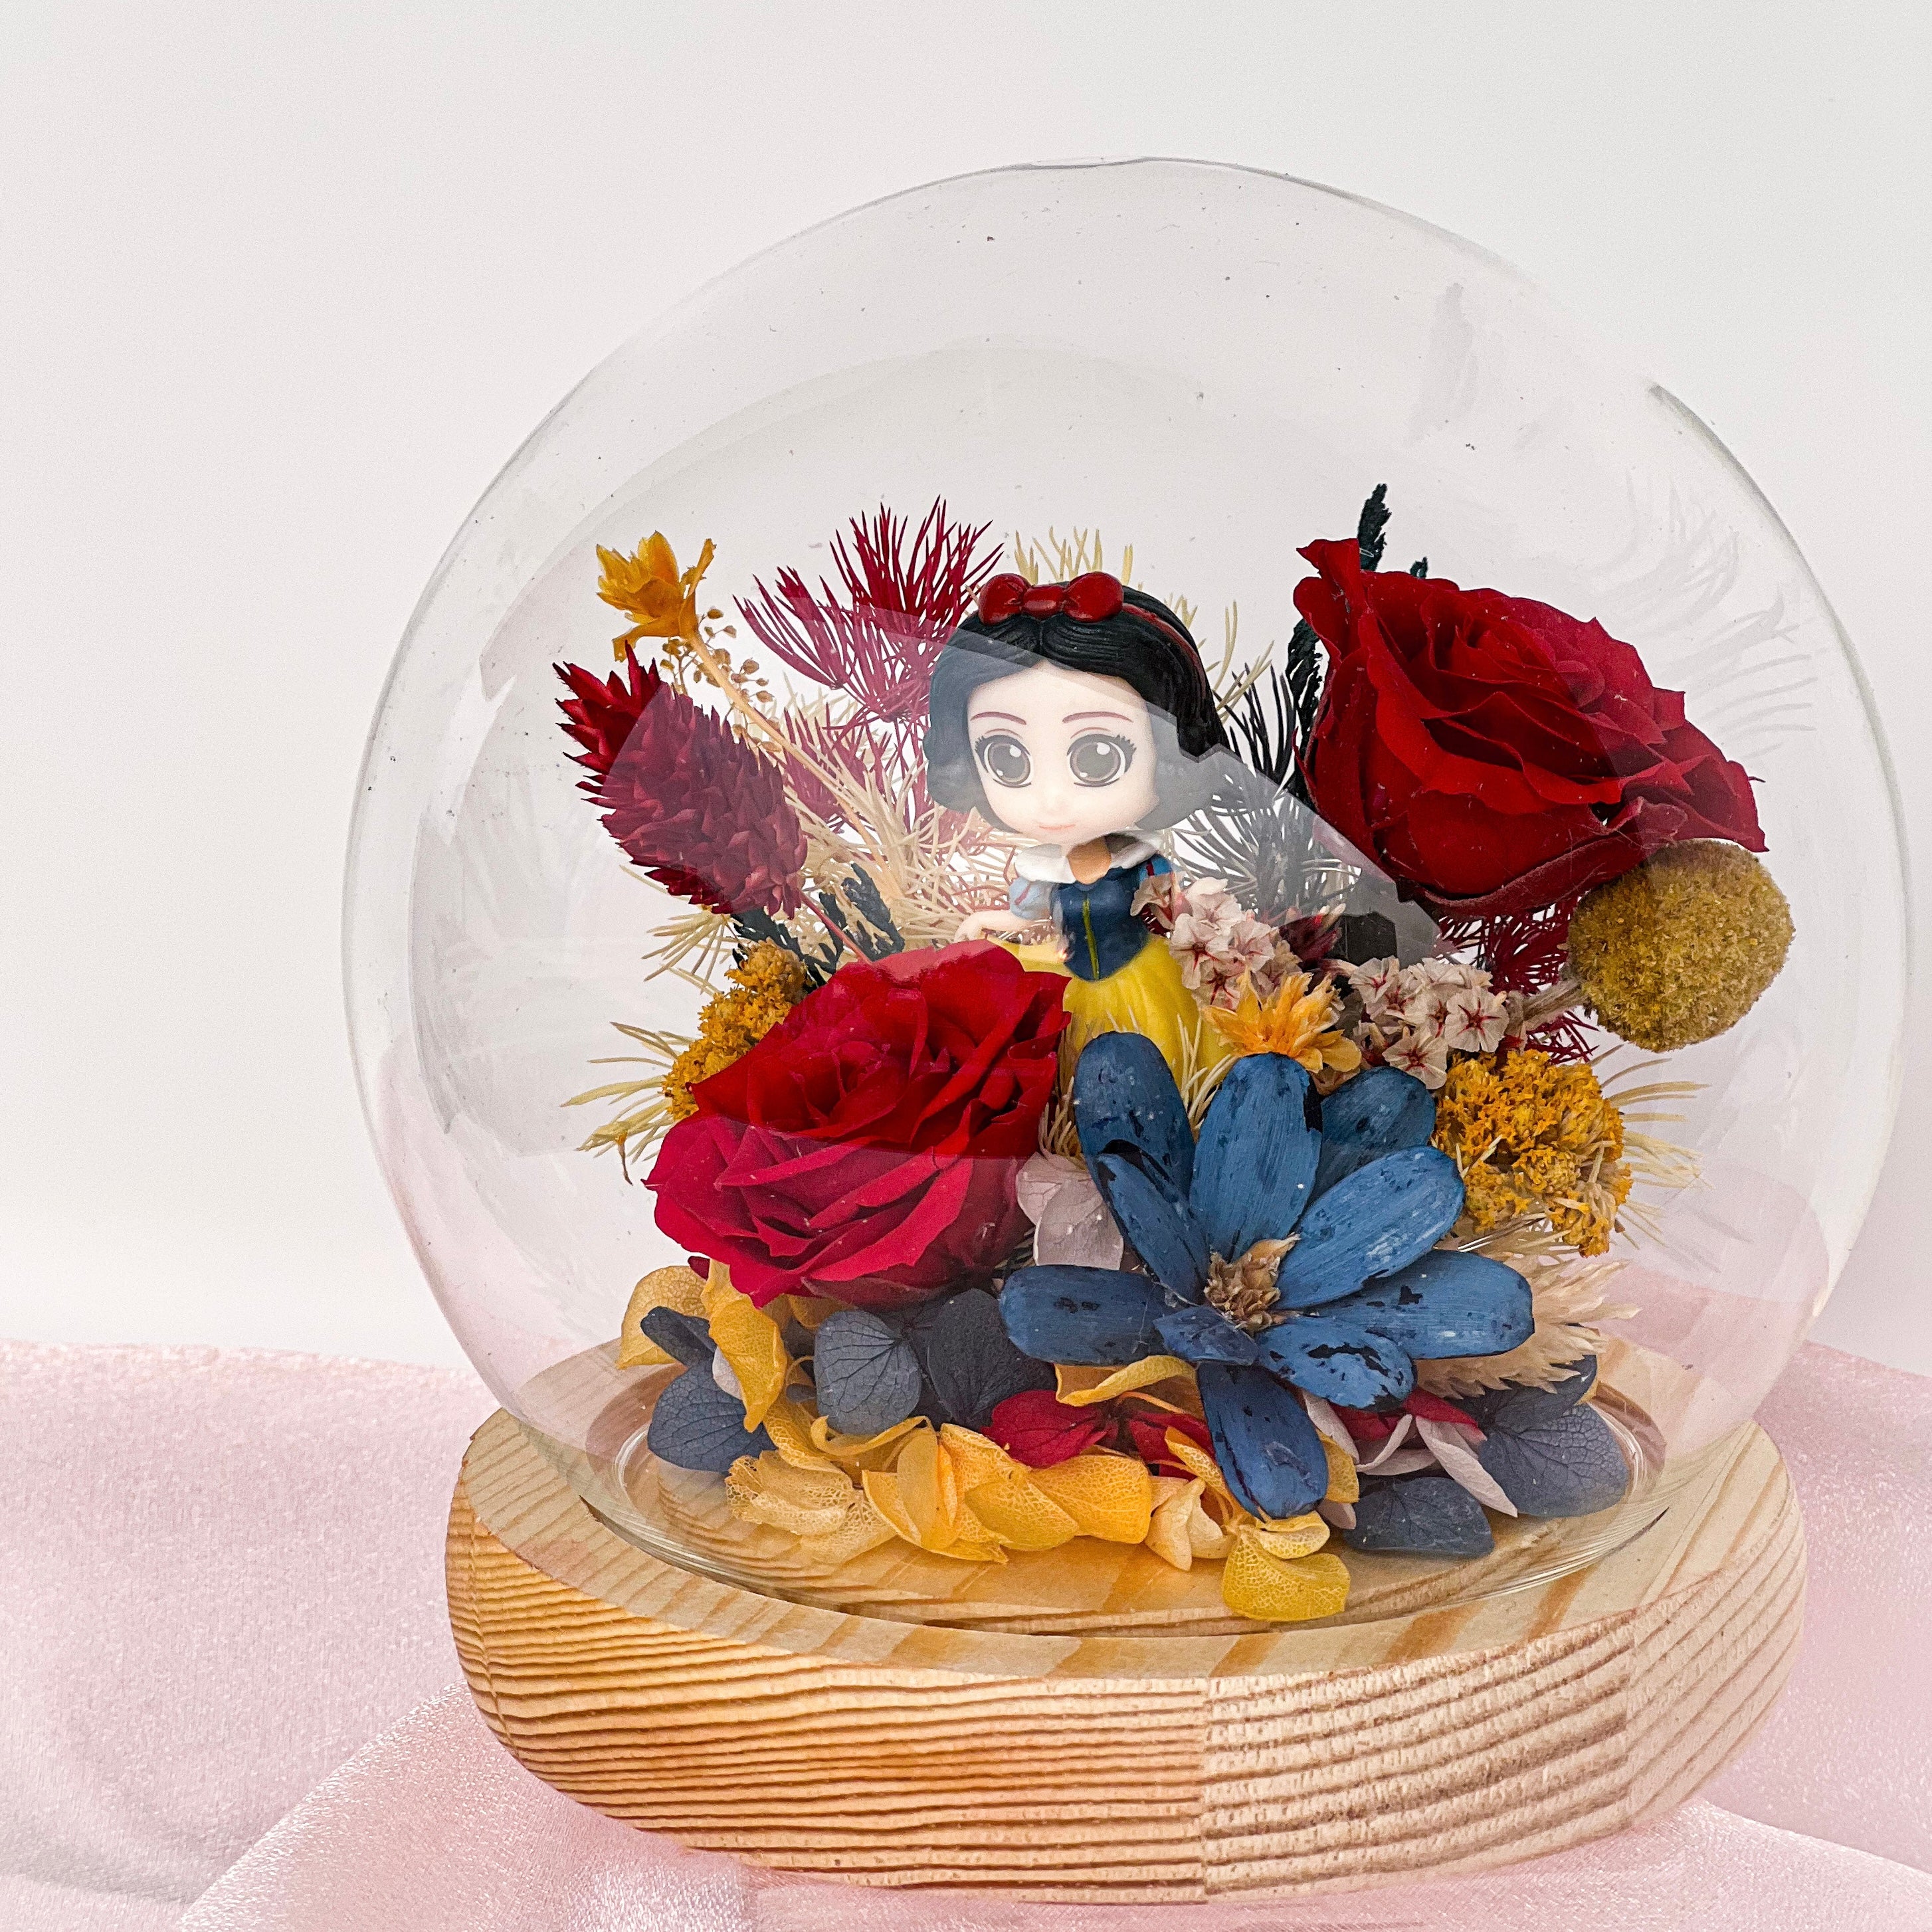 Glass Dome with Preserved Flower and Disney Princess - Snow White Figurine